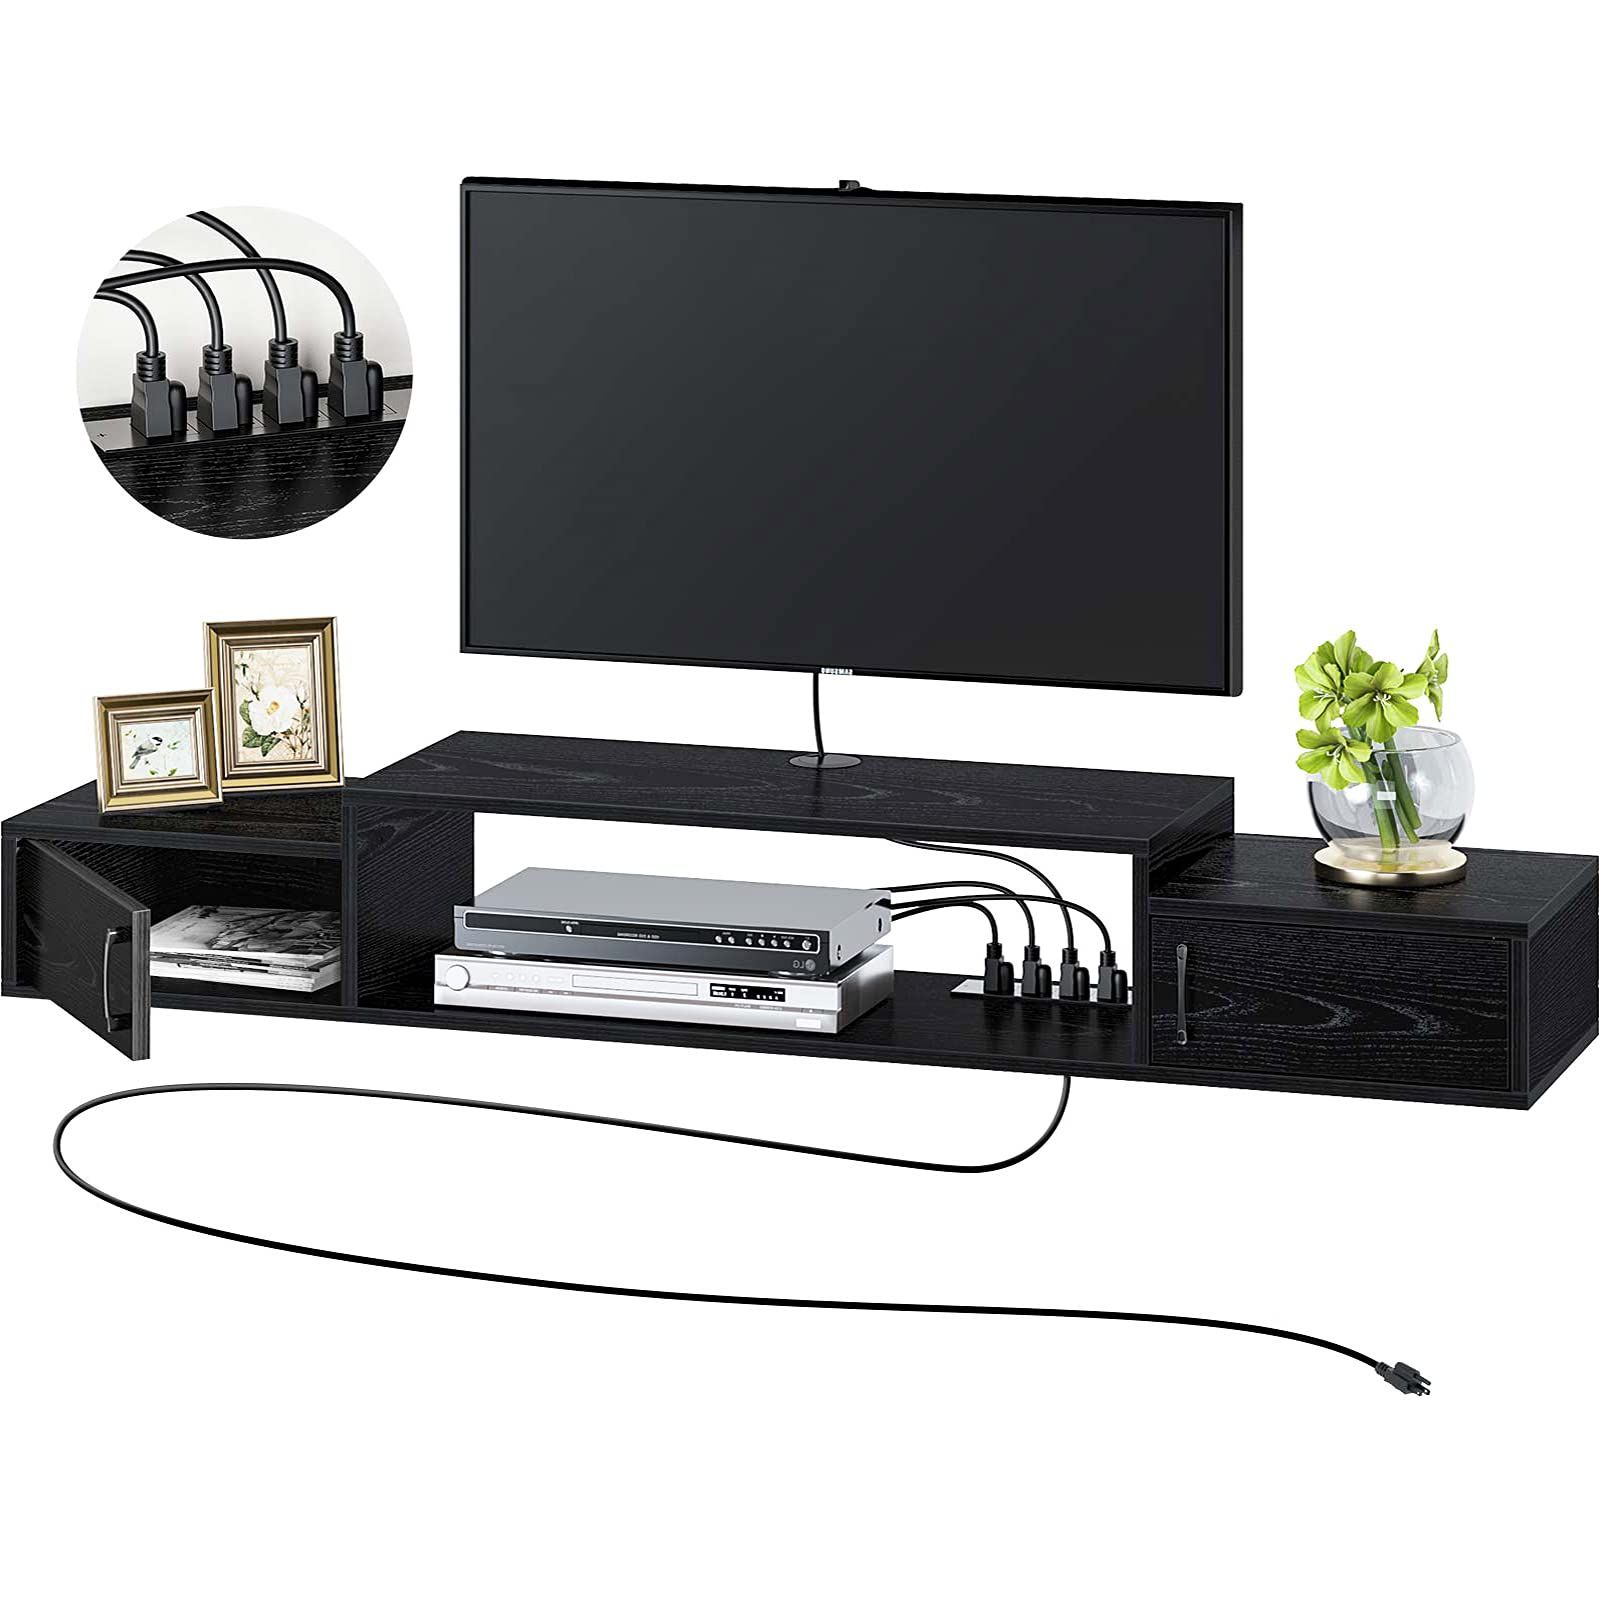 Led Tv Stands With Outlet Throughout 2019 Buy Rolanstar Floating Tv Shelf With Power Outlet, 47" Wall Ed Tv Stand (Photo 1 of 15)